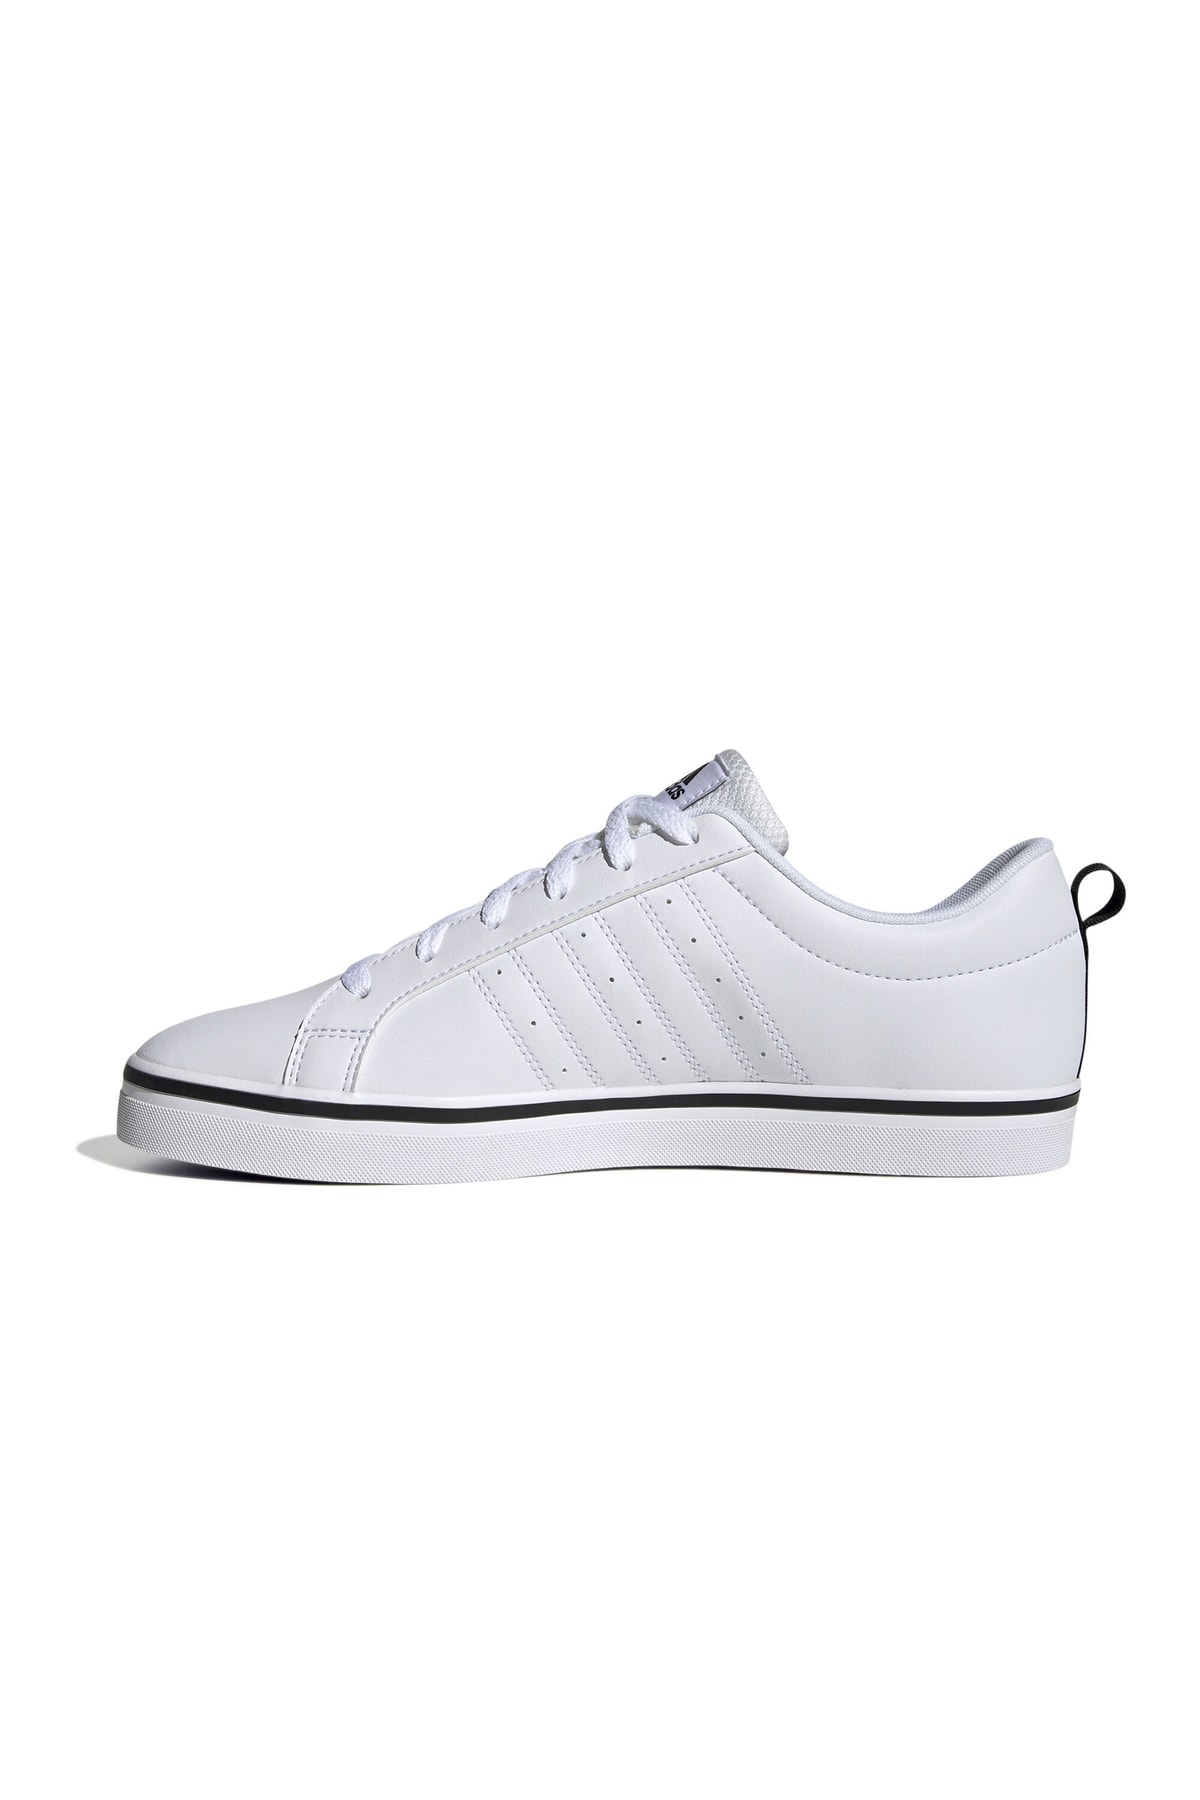 adidas neo Adidas NEO Vs Pace F34634 from 64,95 €-vietvuevent.vn